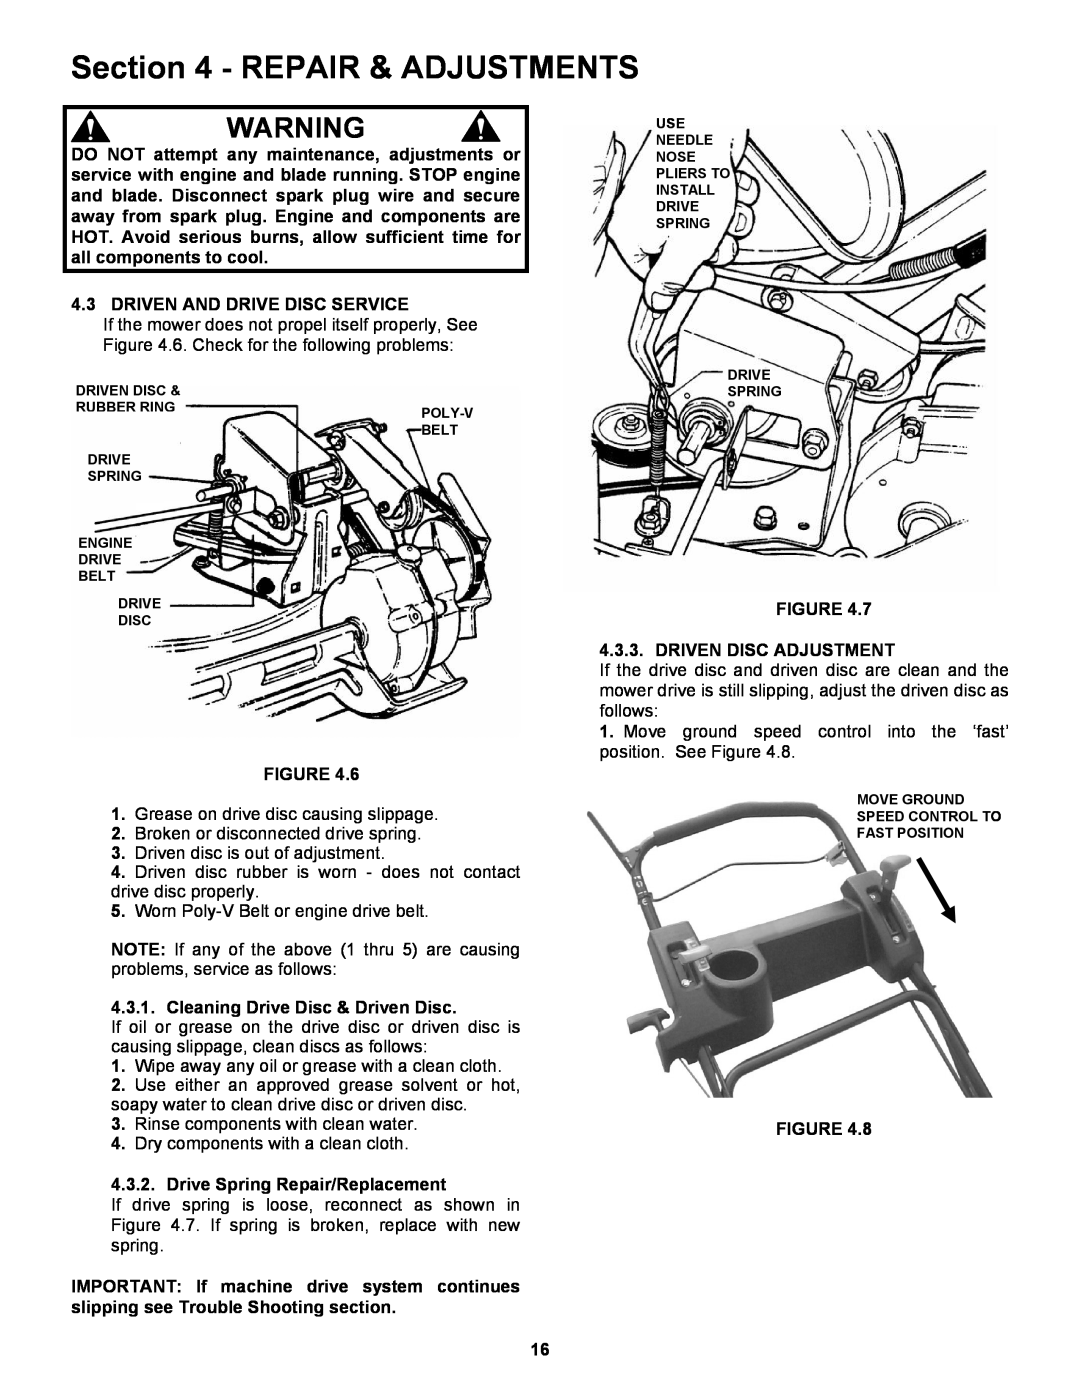 Snapper CRP216019KWV important safety instructions Repair & Adjustments, Grease on drive disc causing slippage 